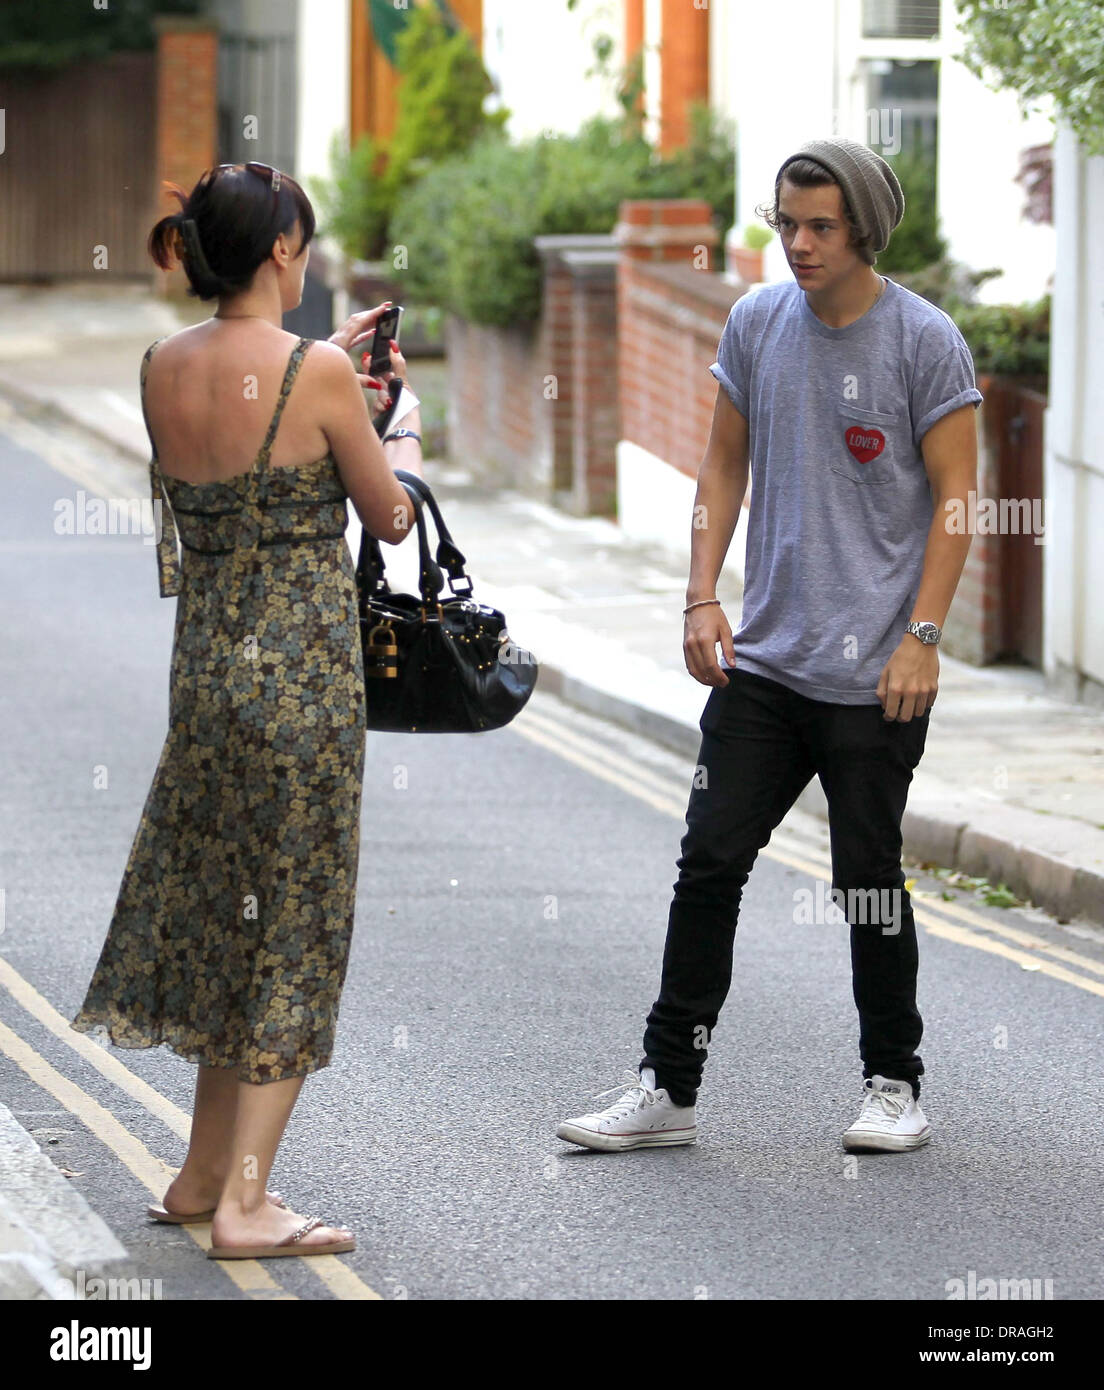 Harry Styles of One Direction seen out and about in Hampstead with friends.  He signed autographs and posed for photographs for fans. London, England -  05.07.12 Stock Photo - Alamy